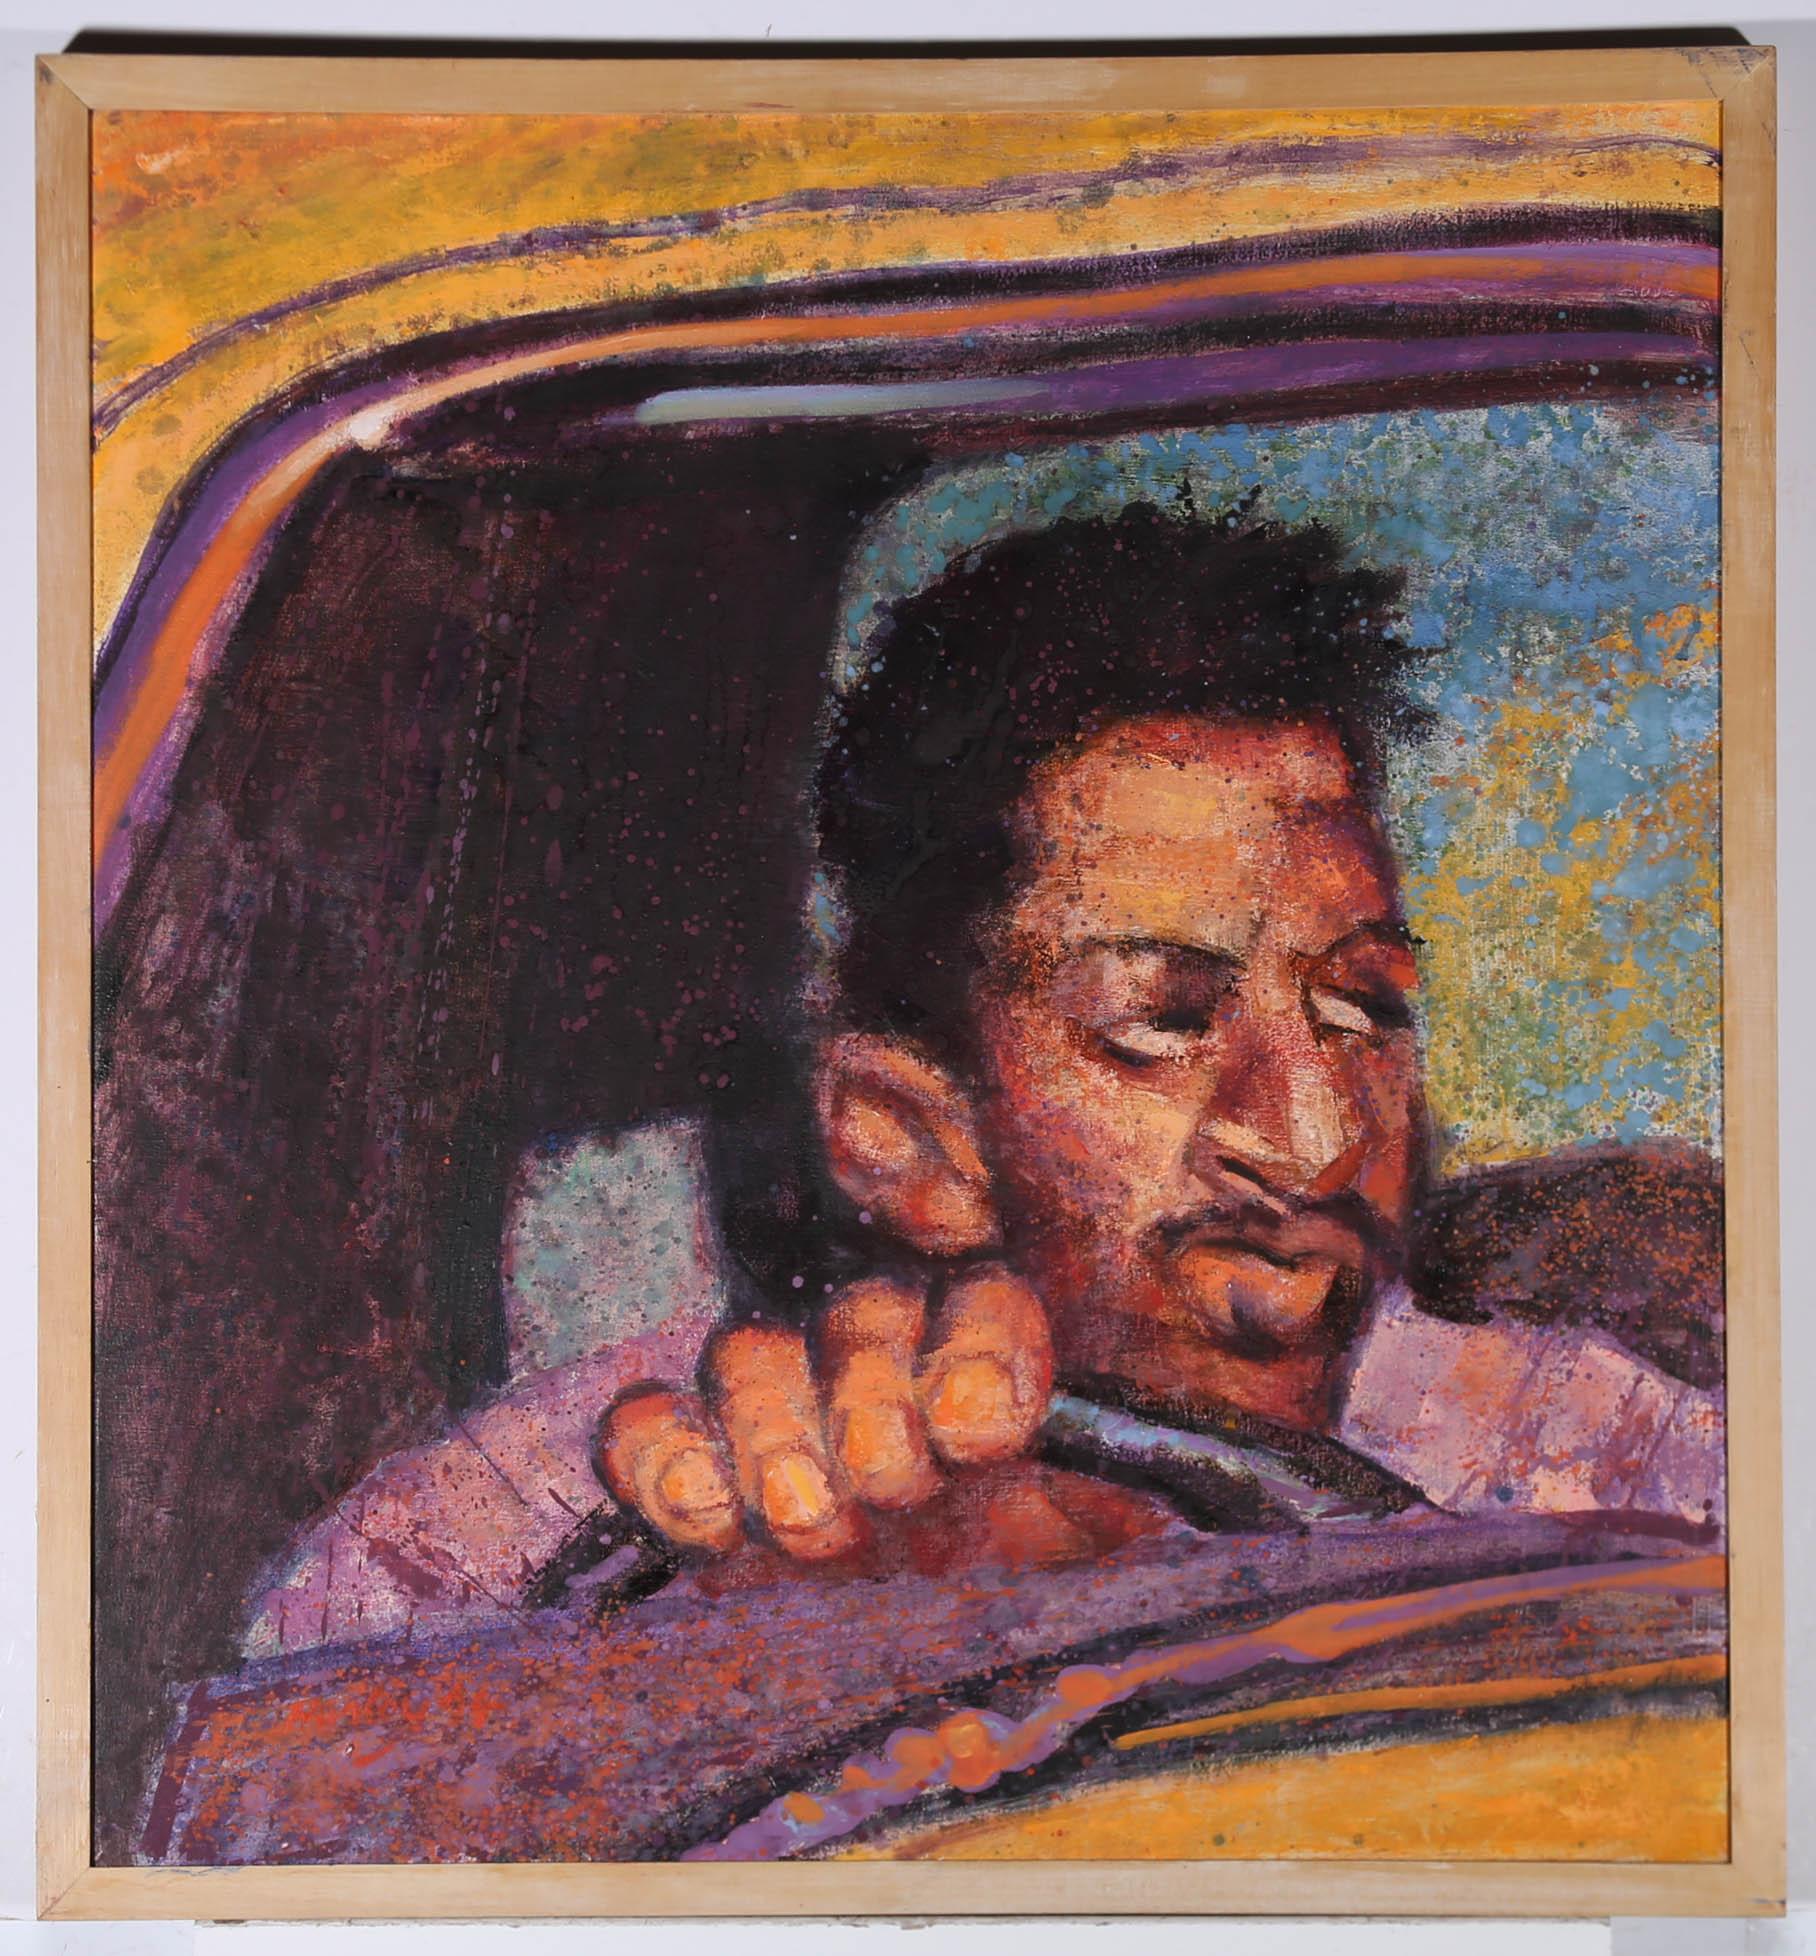 A striking portrait depicting a man in the driver's seat of a car. he clutches the steering wheel in one hand and looks towards the passenger side. Captured in vivid colours in an expressive style. Signed and dated to the lower left. Titled to the